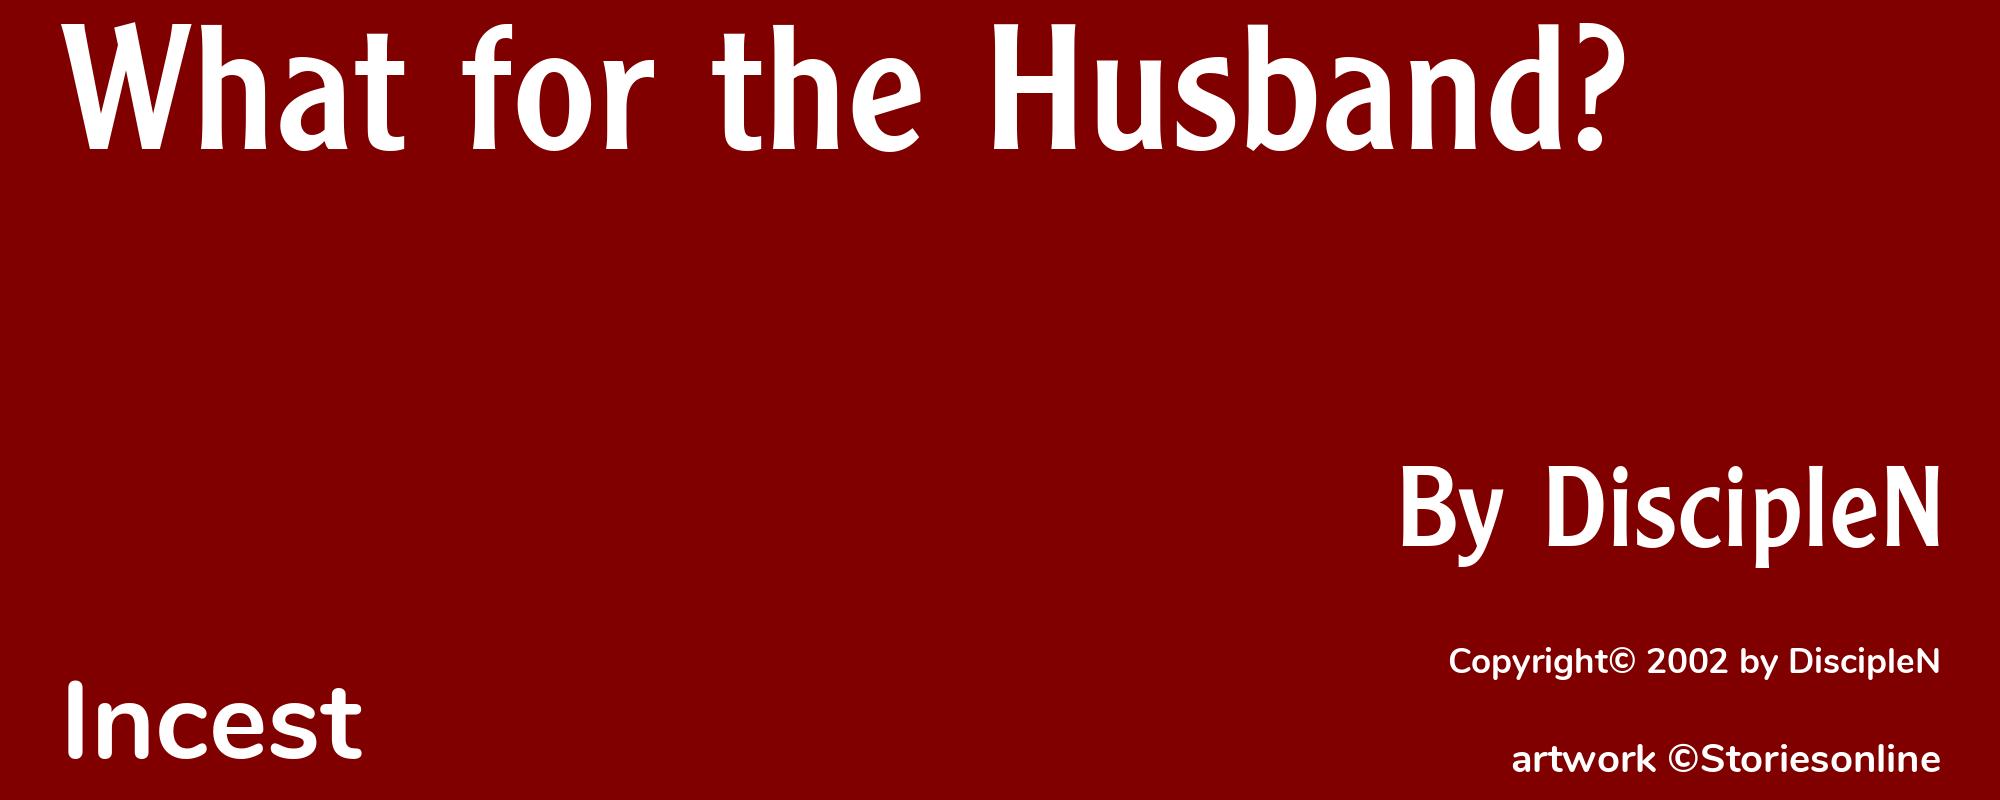 What for the Husband? - Cover